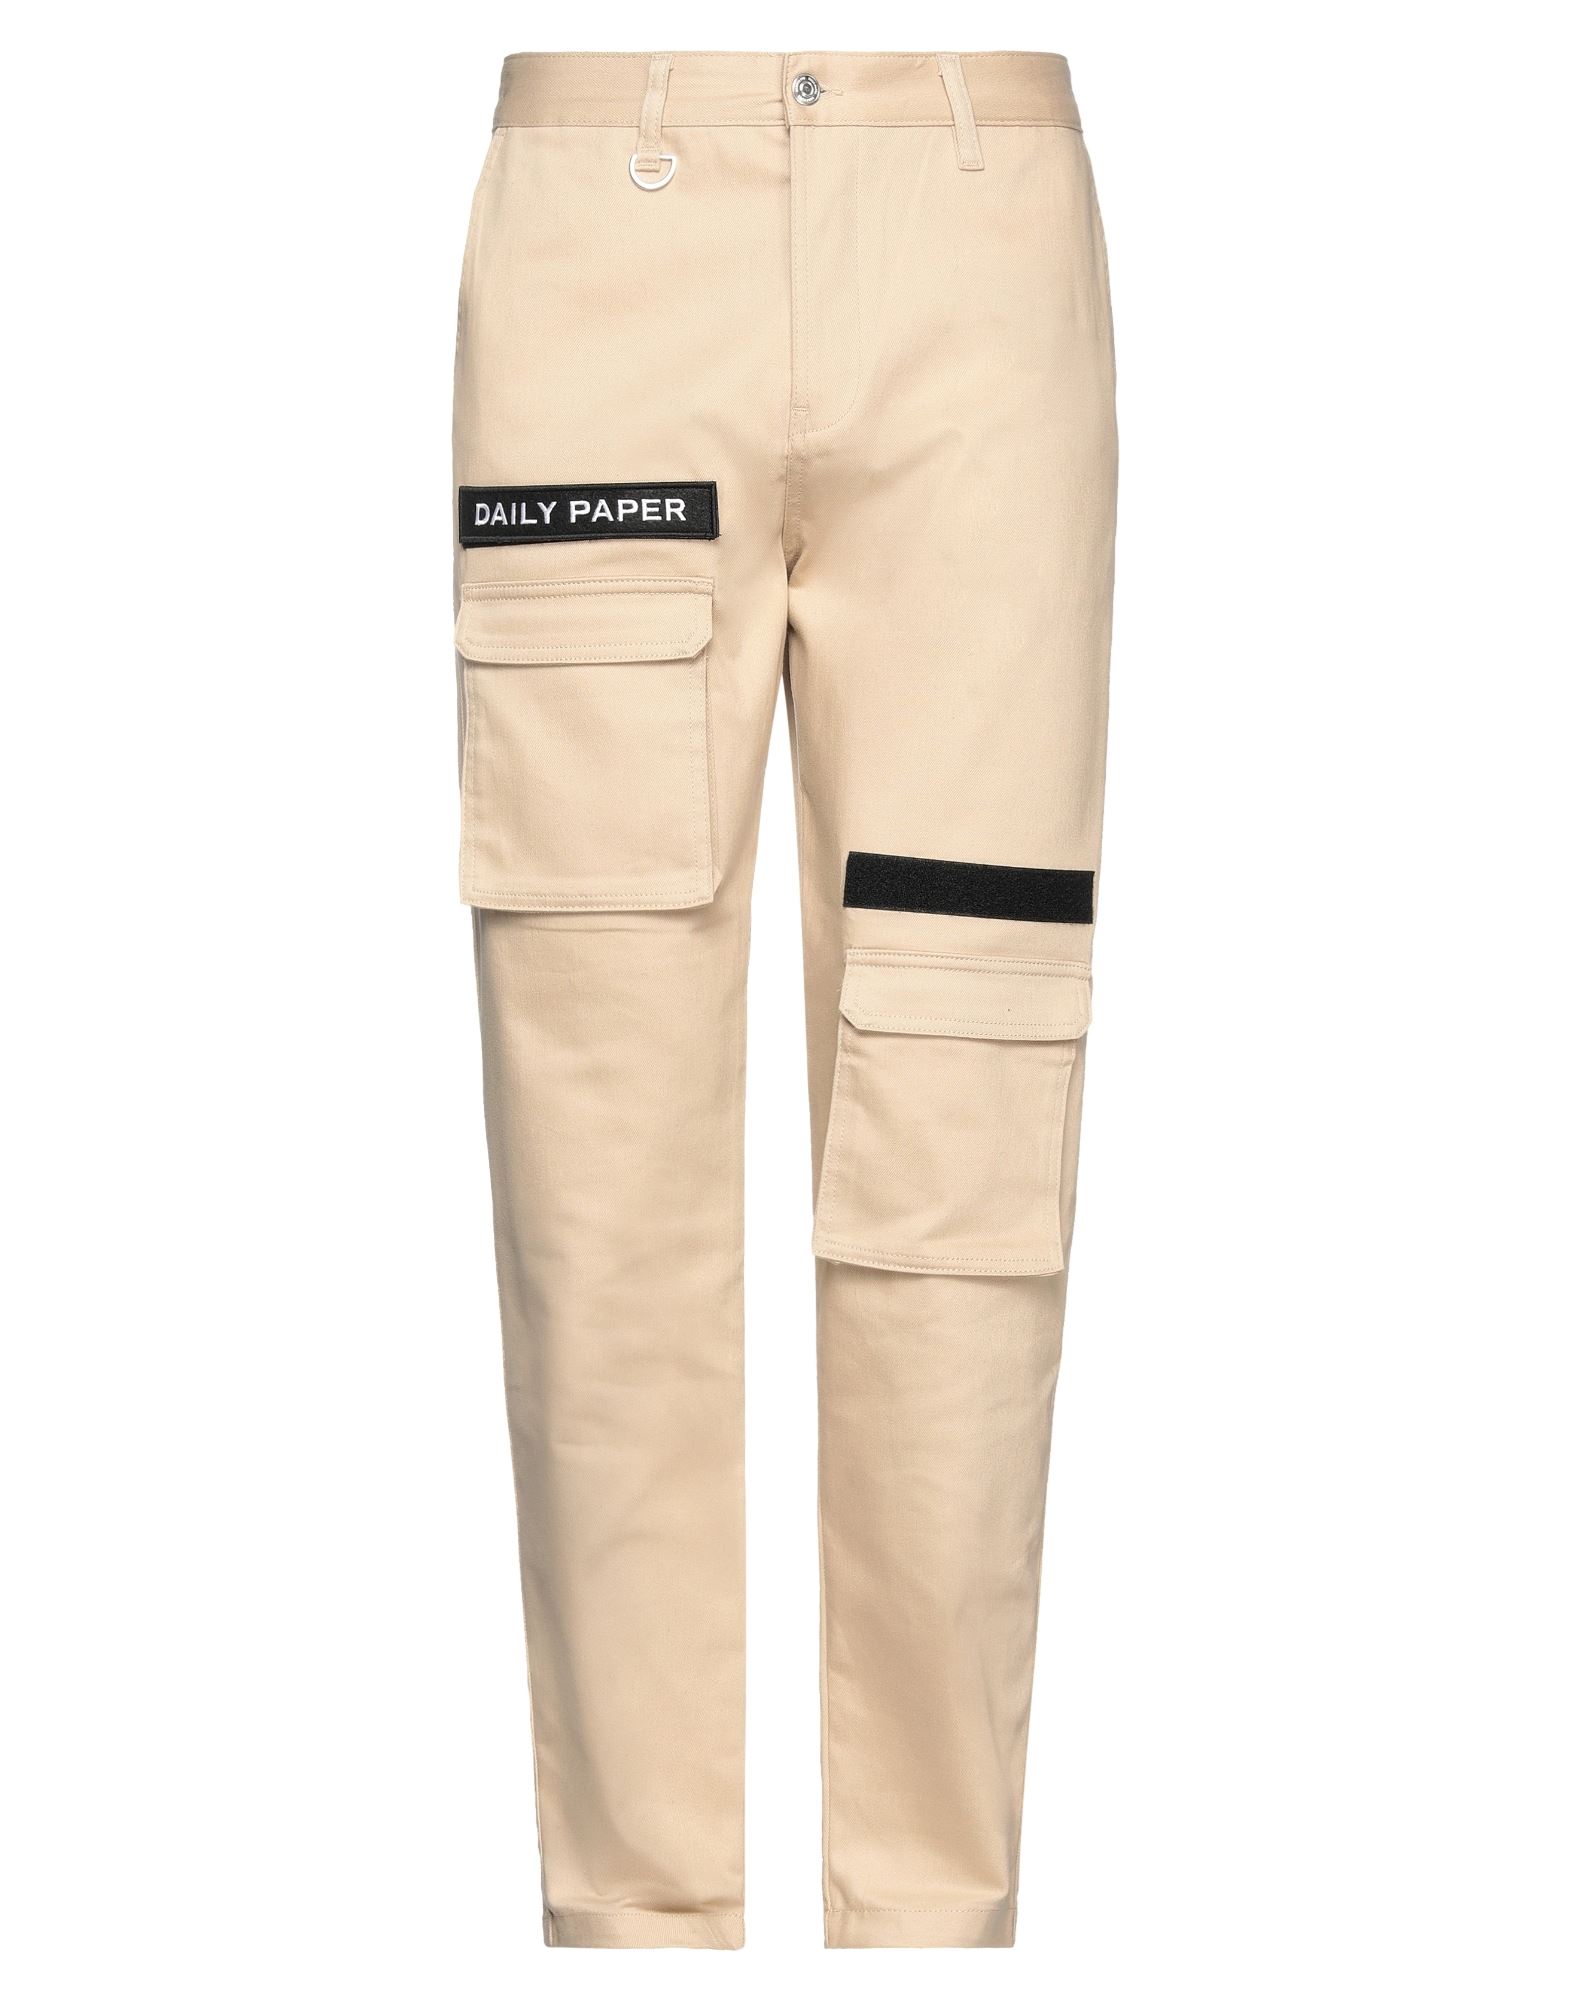 Daily Paper Pants Beige |